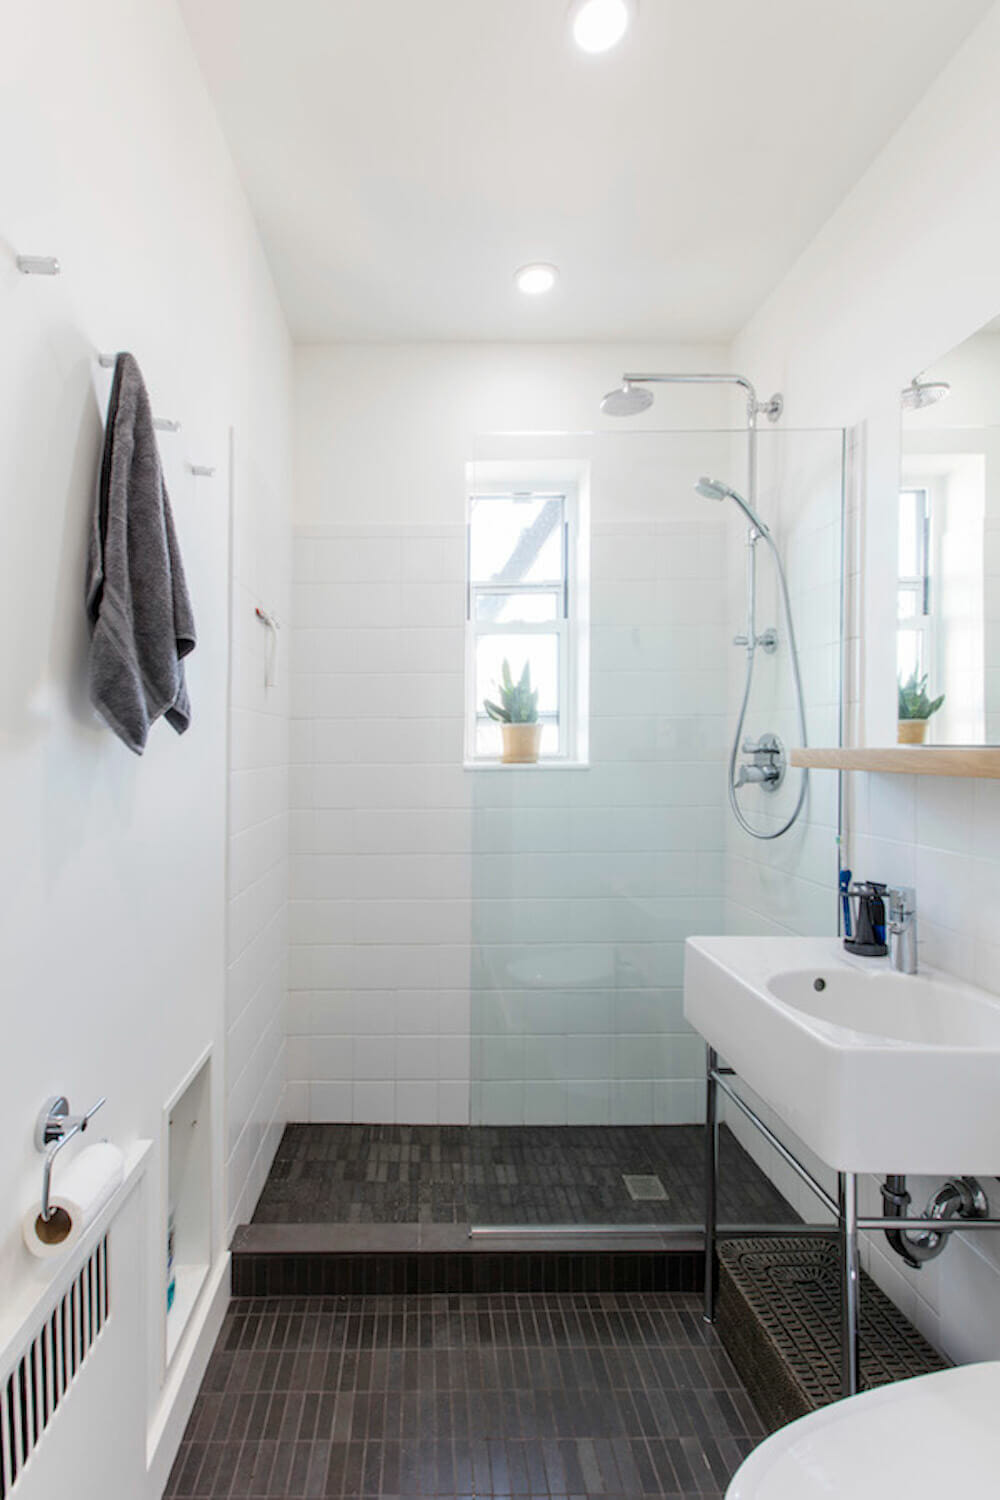 A narrow wet room-style bathroom with white tile walls and dark slate flooring.